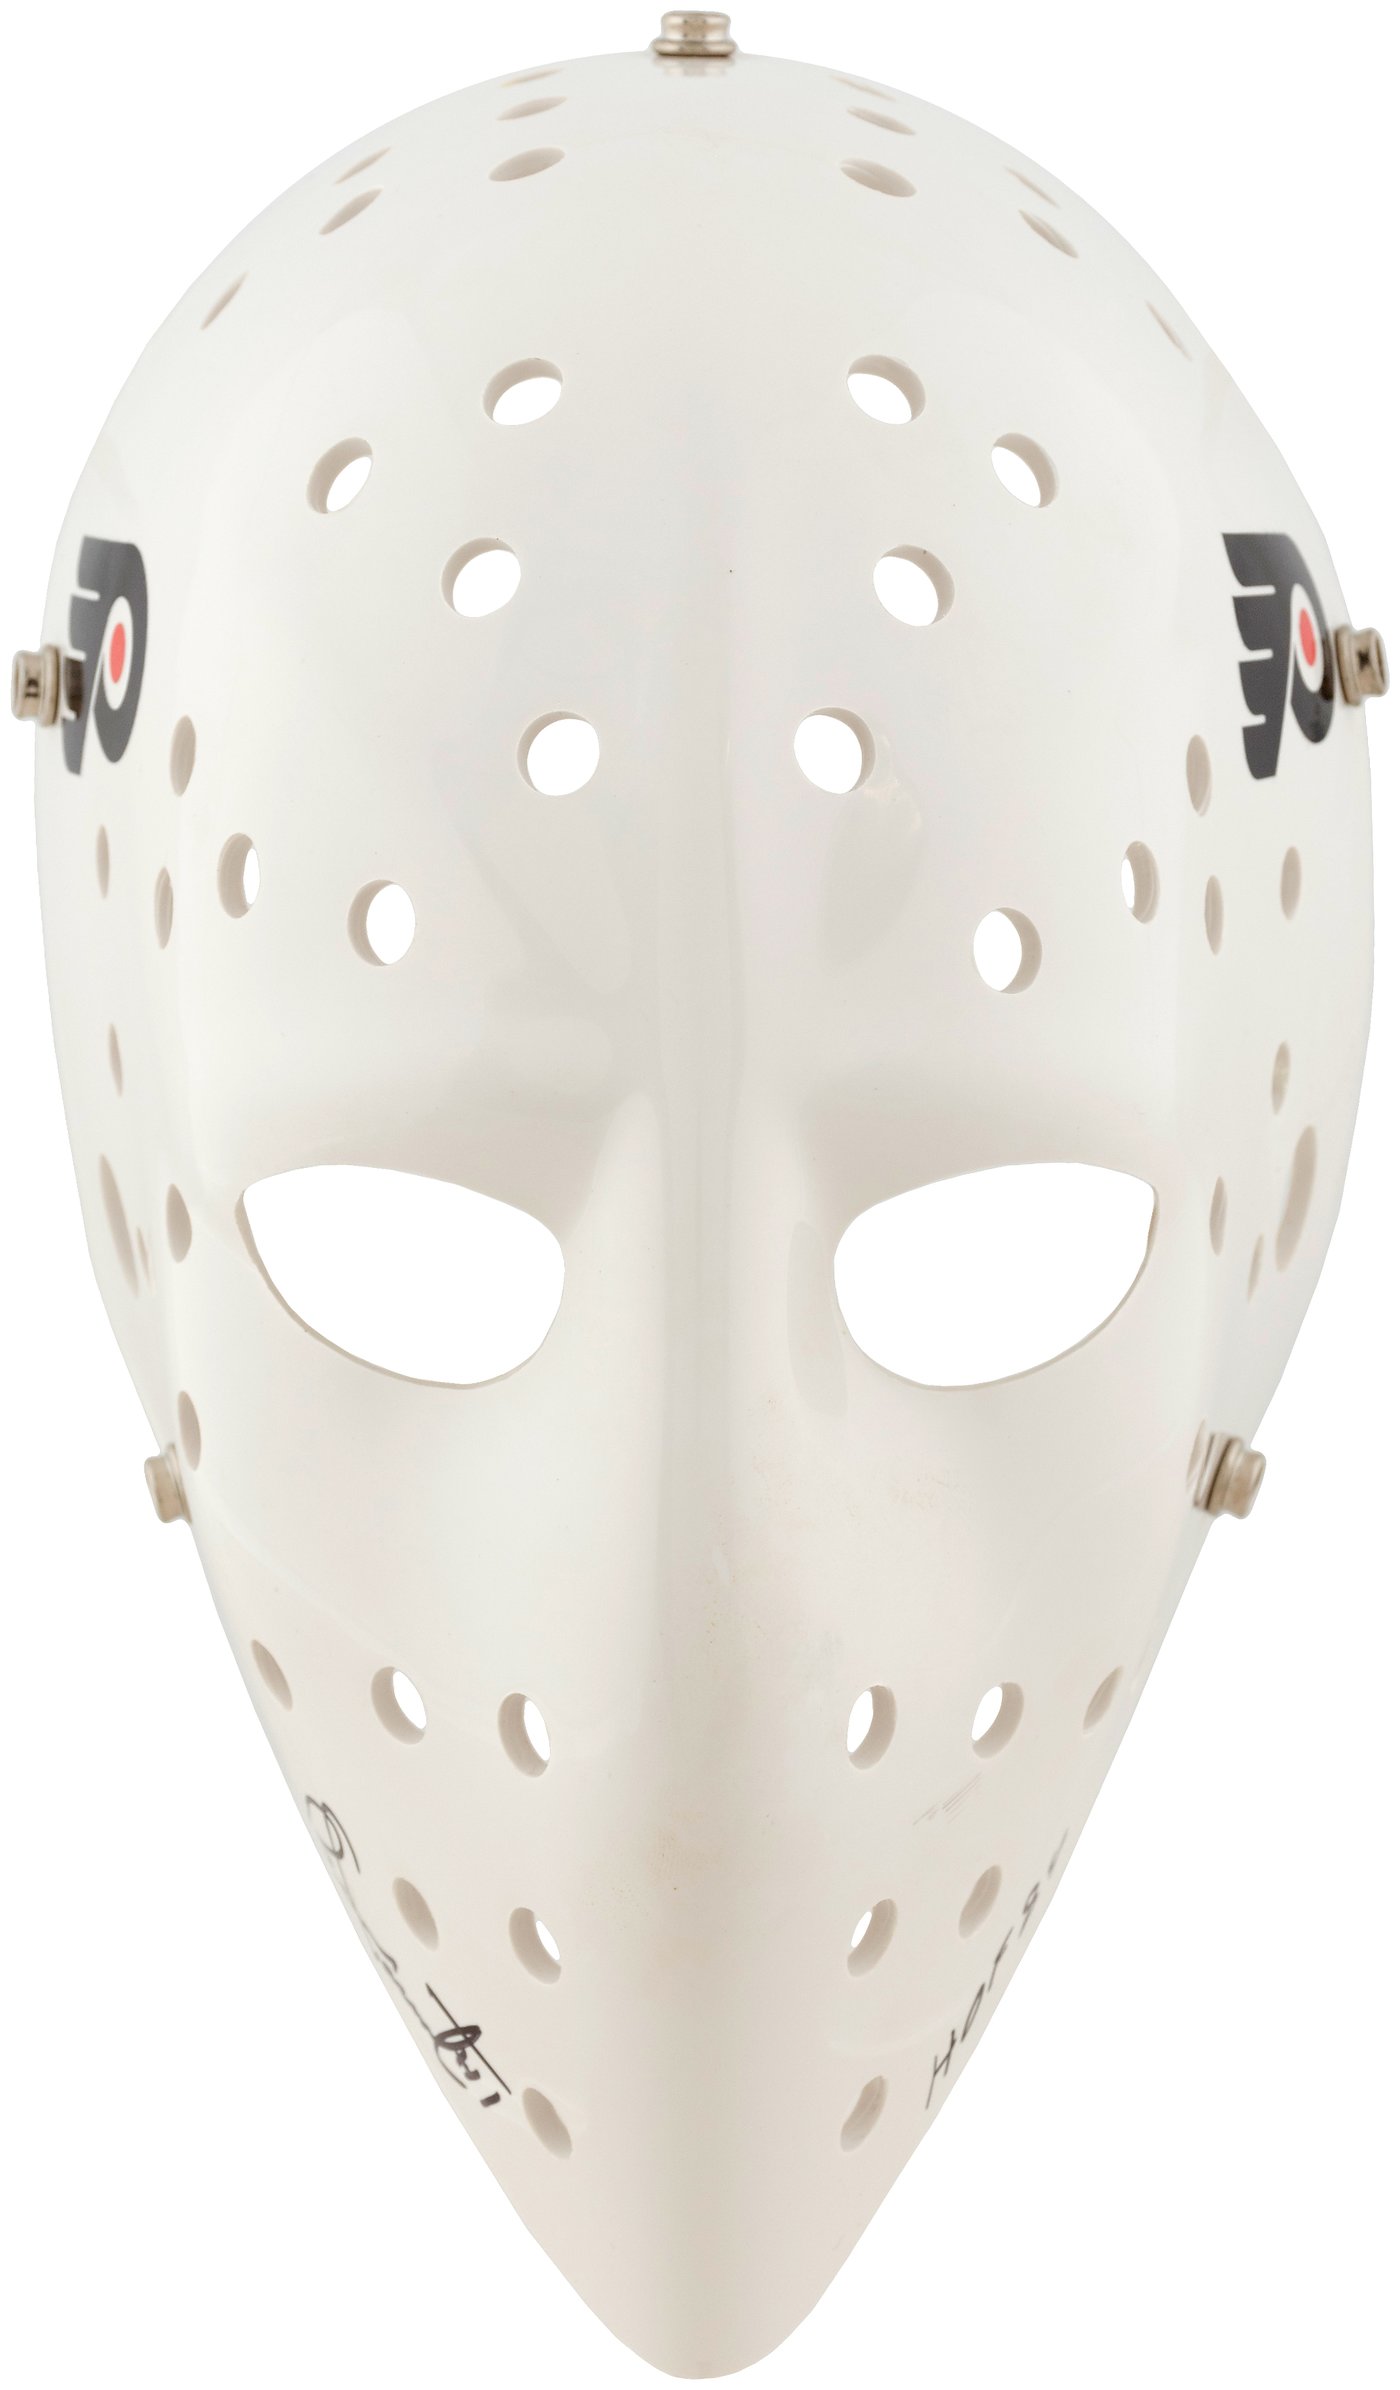 NEW SIGNING: BERNIE PARENT SIGNED GOALIE MASKS! A COMPANY FIRST – ARMORI  STEELE